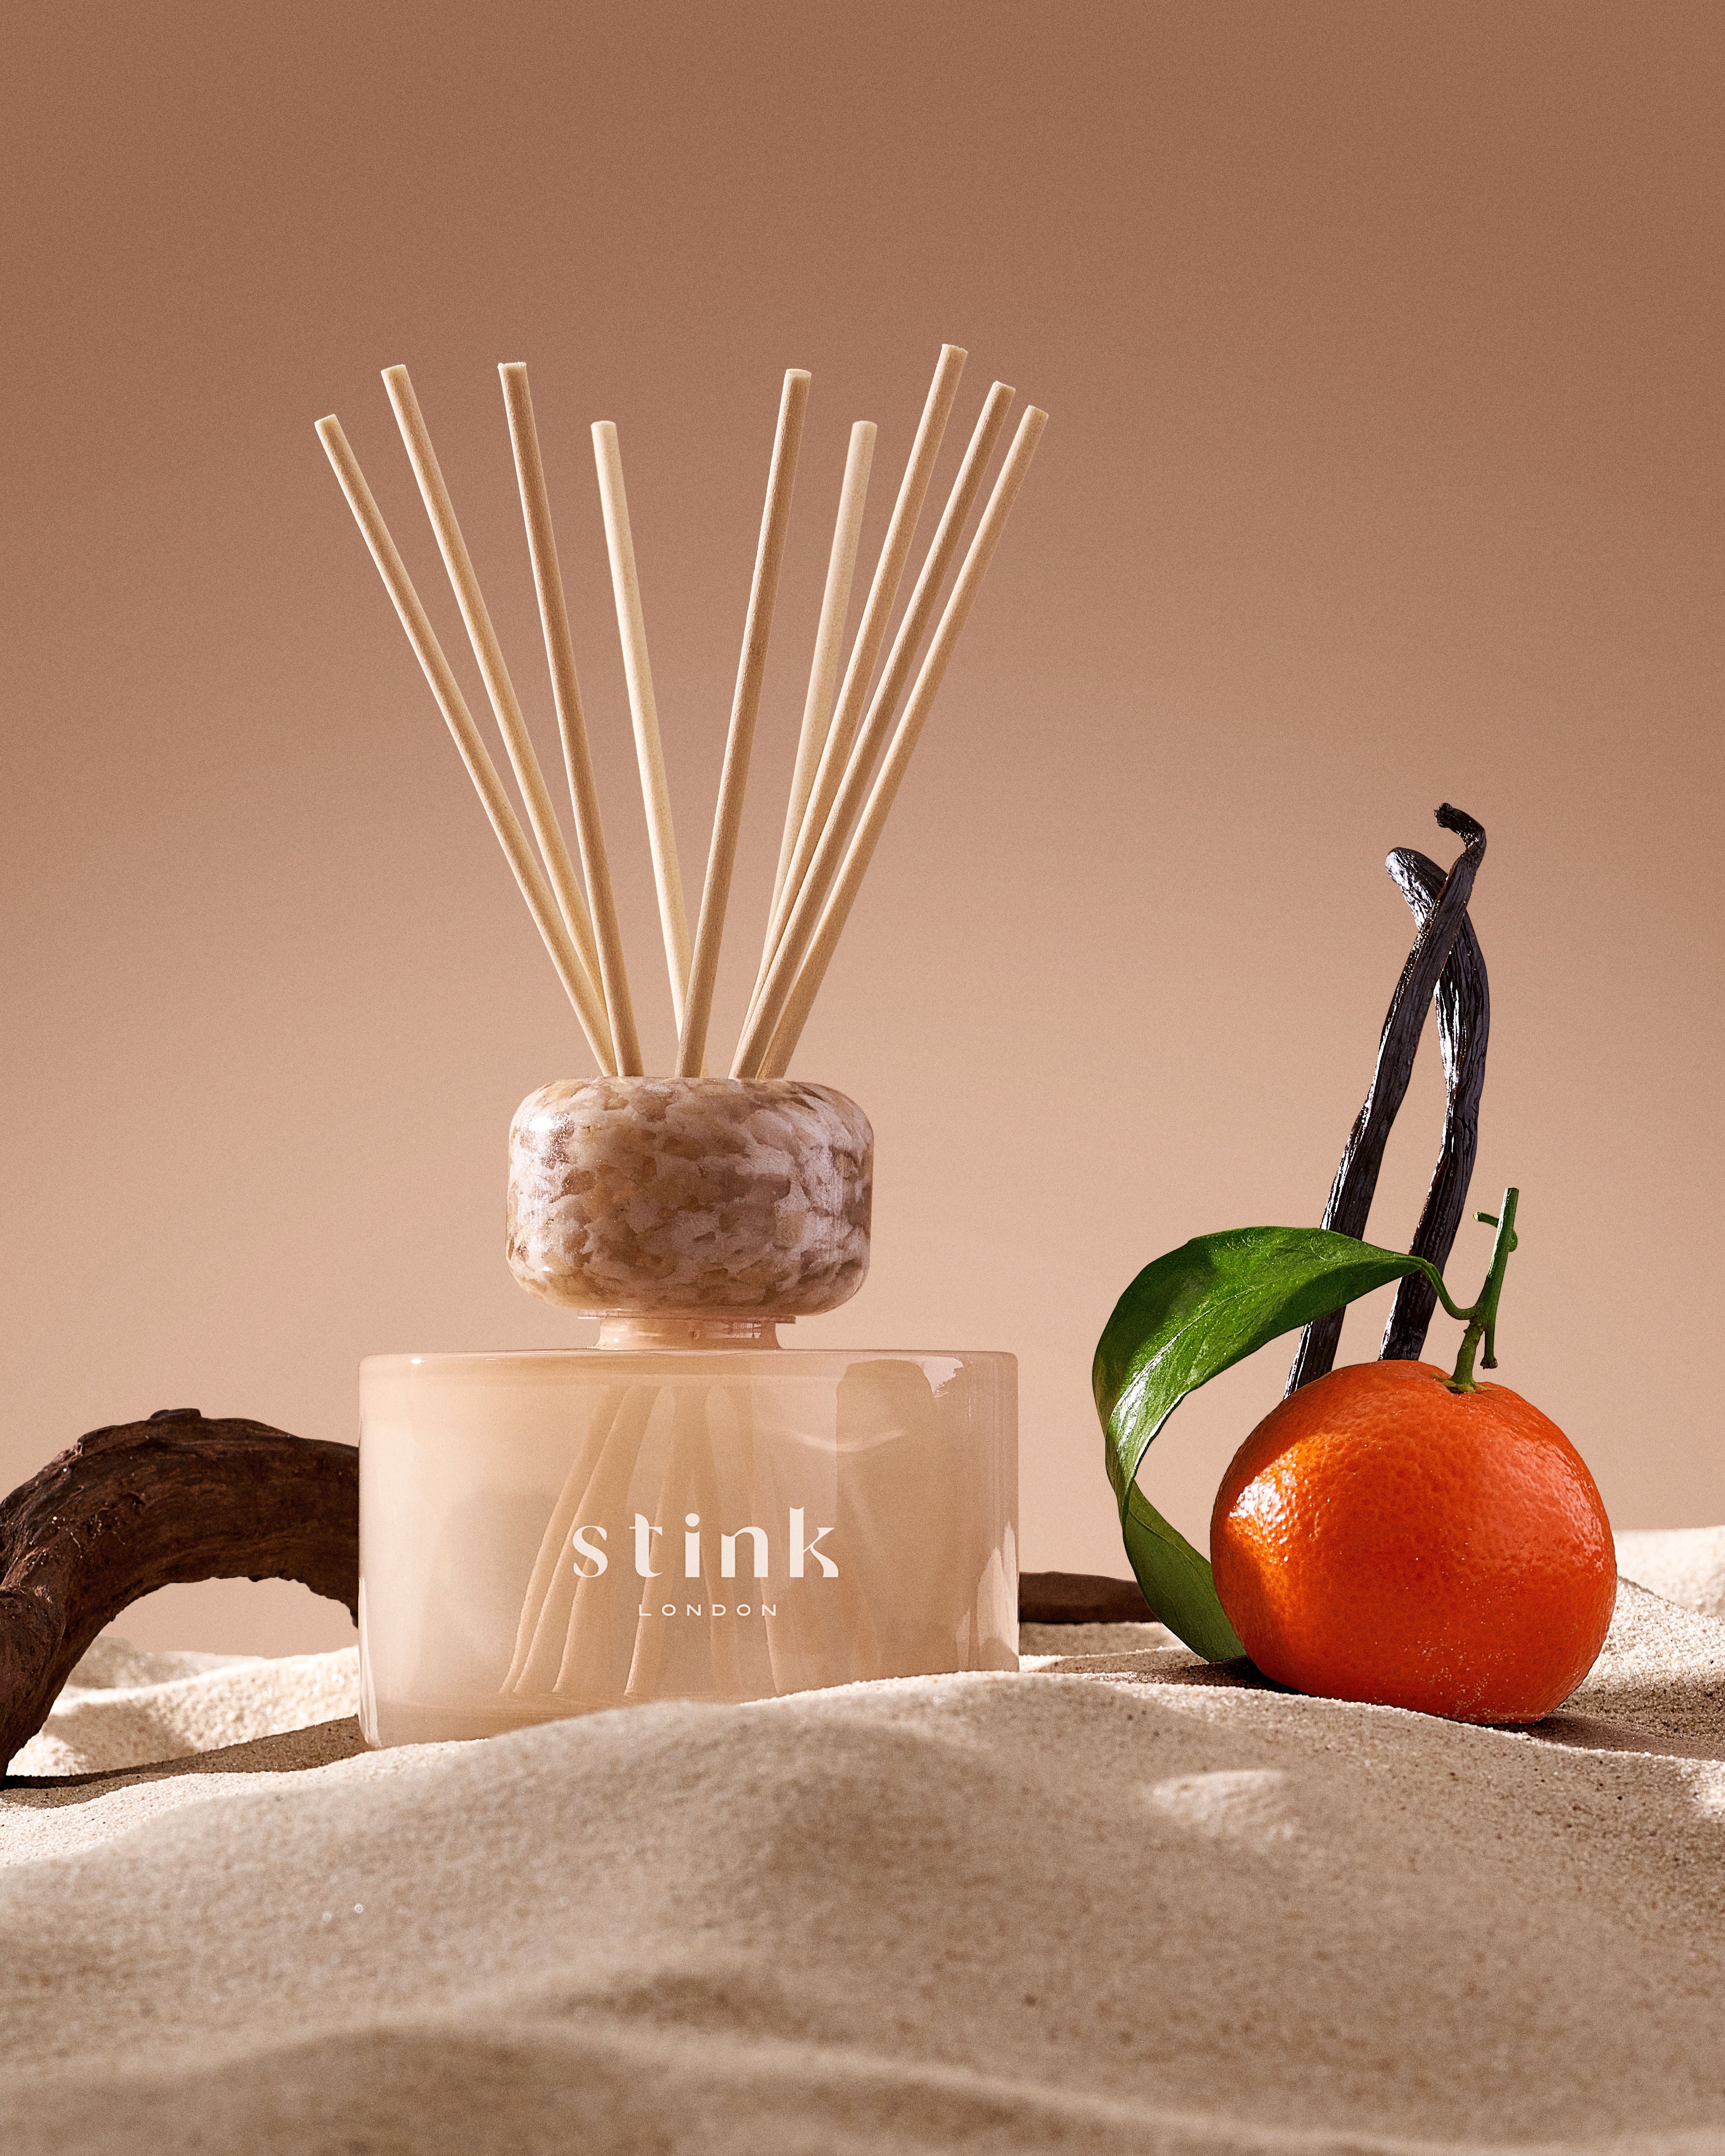 Stink London reed diffusers - mothers day perfect gift home fragrance subscription refill pouches, refillable bottles rattan reeds. sustainable scent tonka room with a view